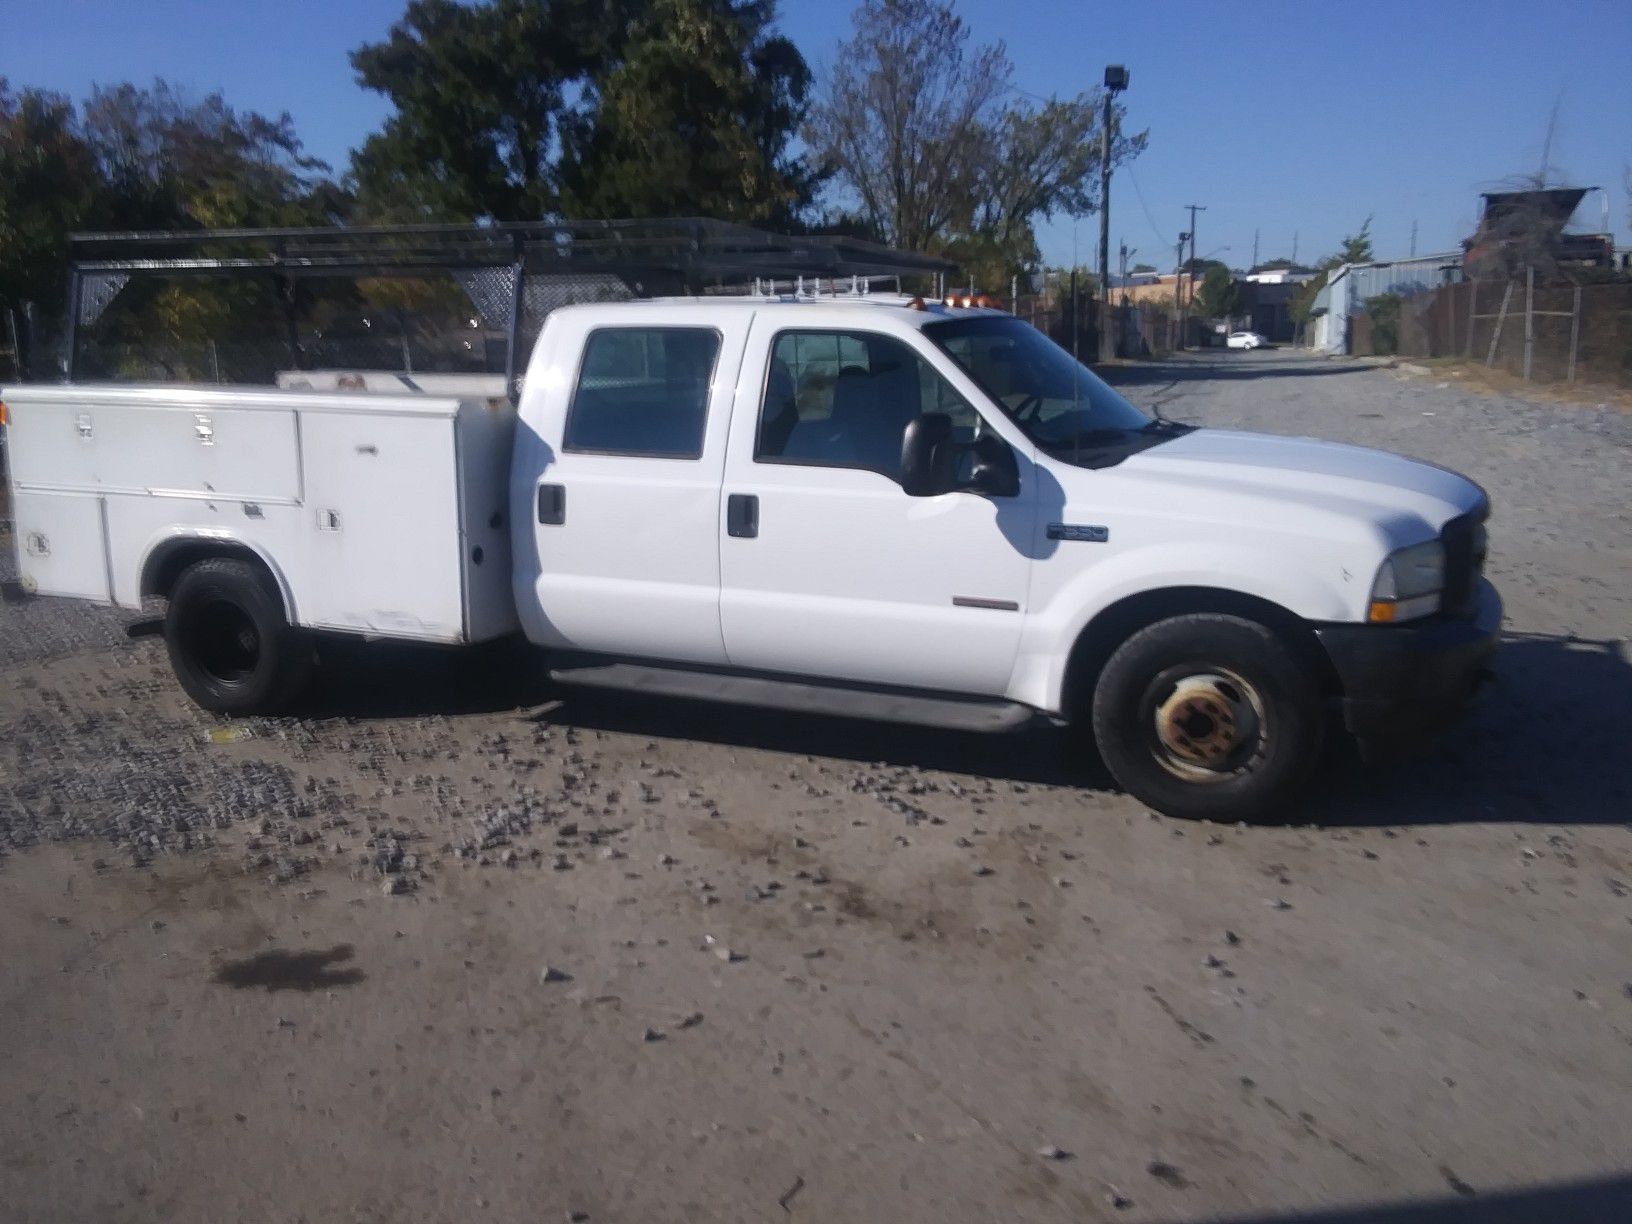 2003 Ford F350 Utility Truck 6.0 Powerstroke Turbo Diesel 200k miles runs and drives!!!